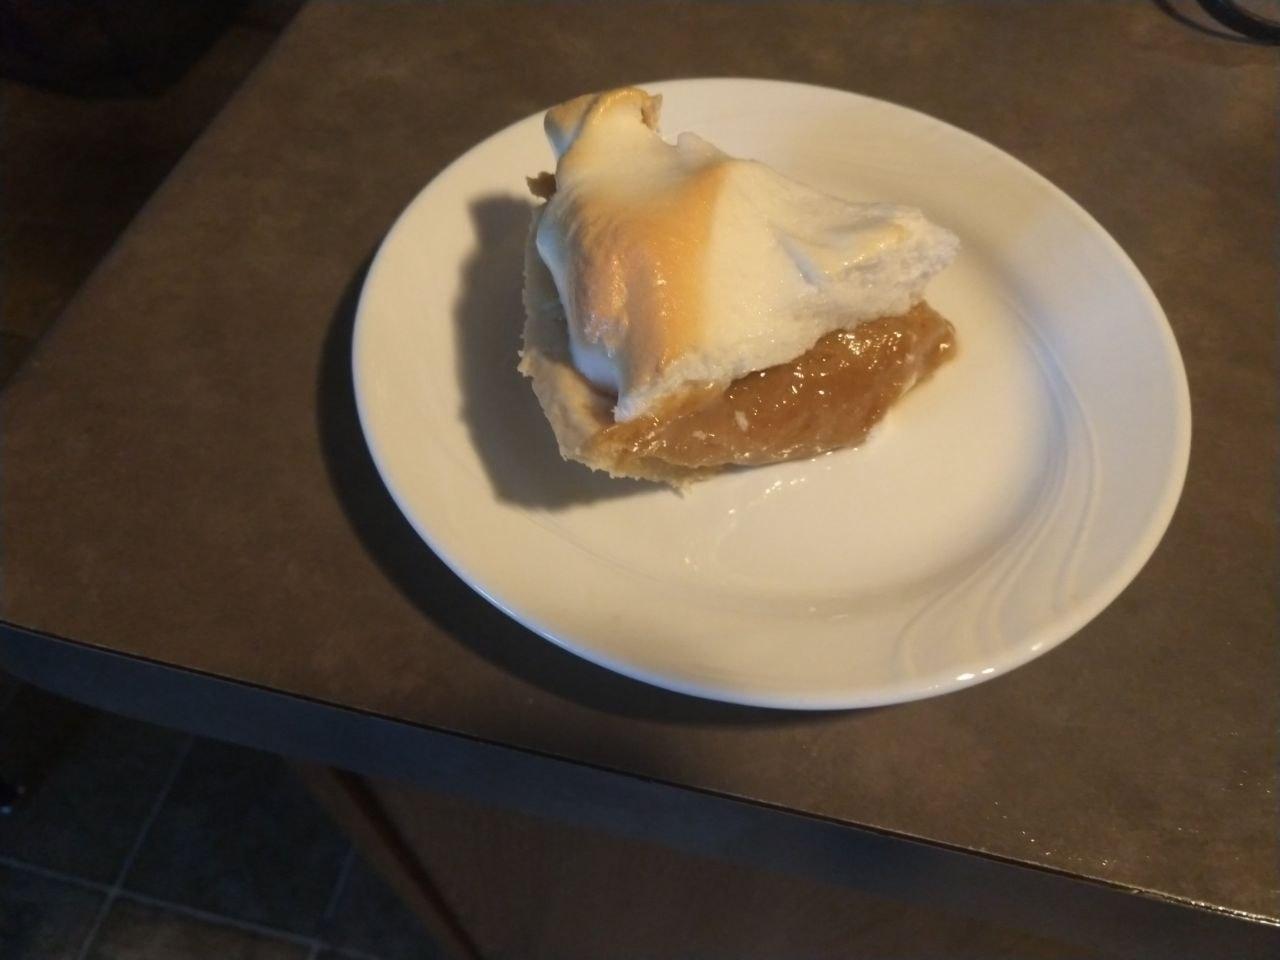 Slice of peanut butter pie on a plate. Same recipe, with peanut butter instead of cocoa powder in the custard.